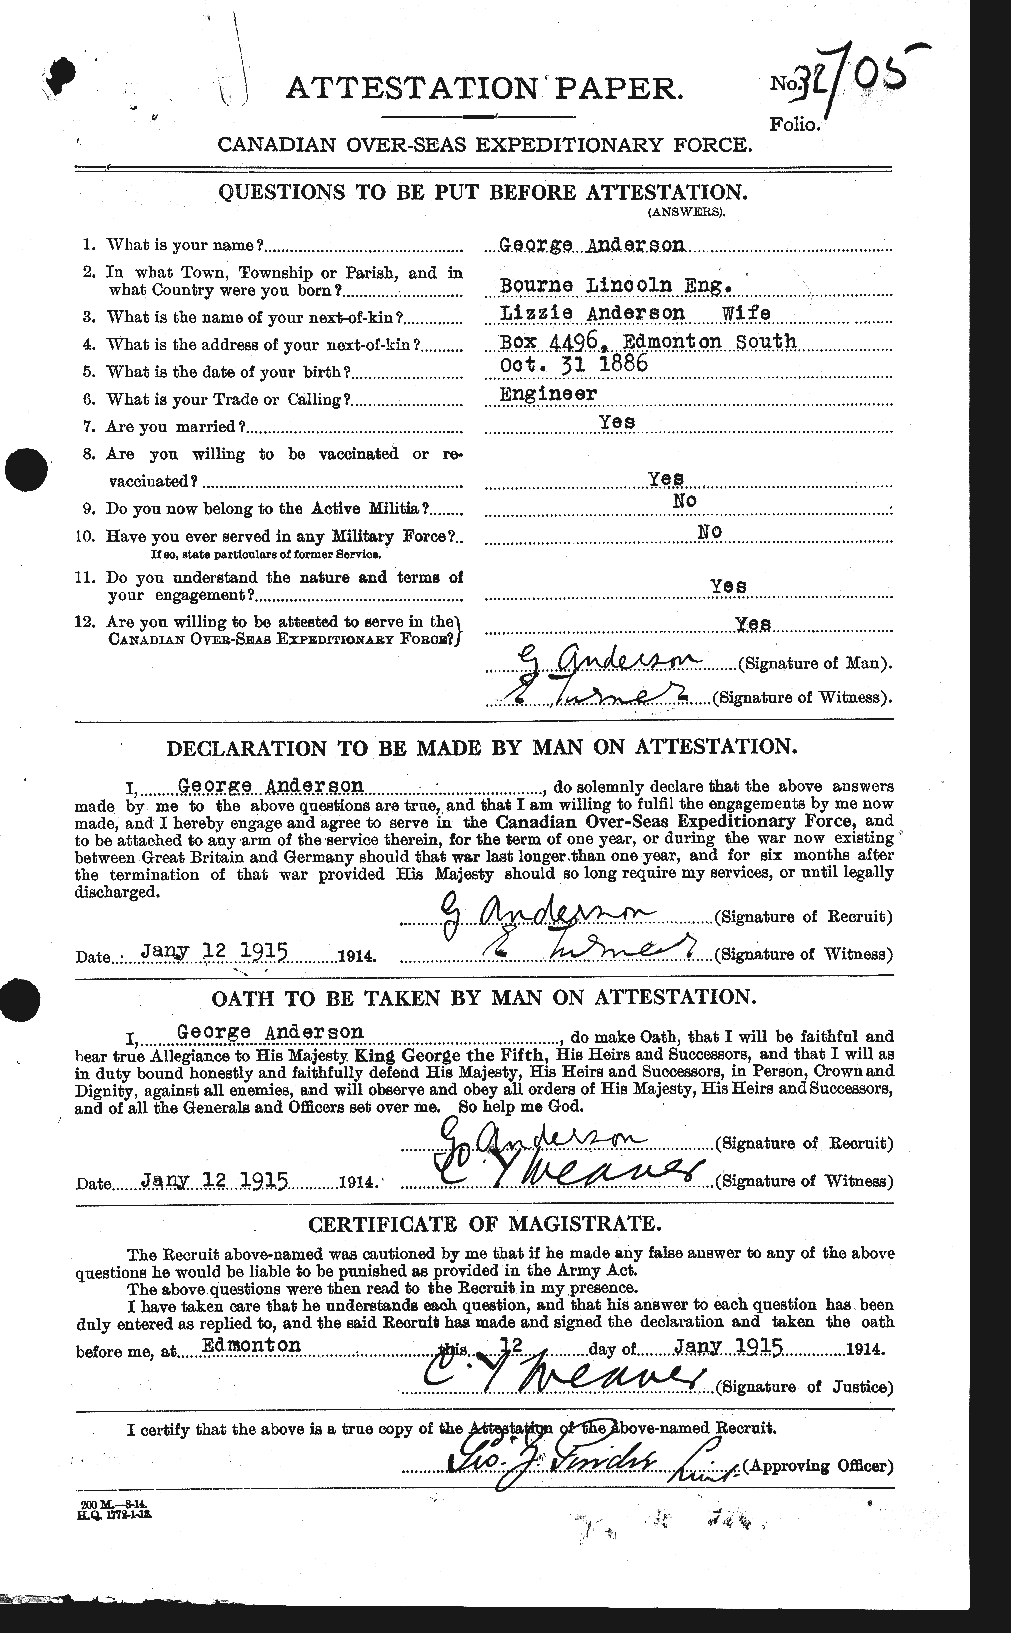 Personnel Records of the First World War - CEF 209761a